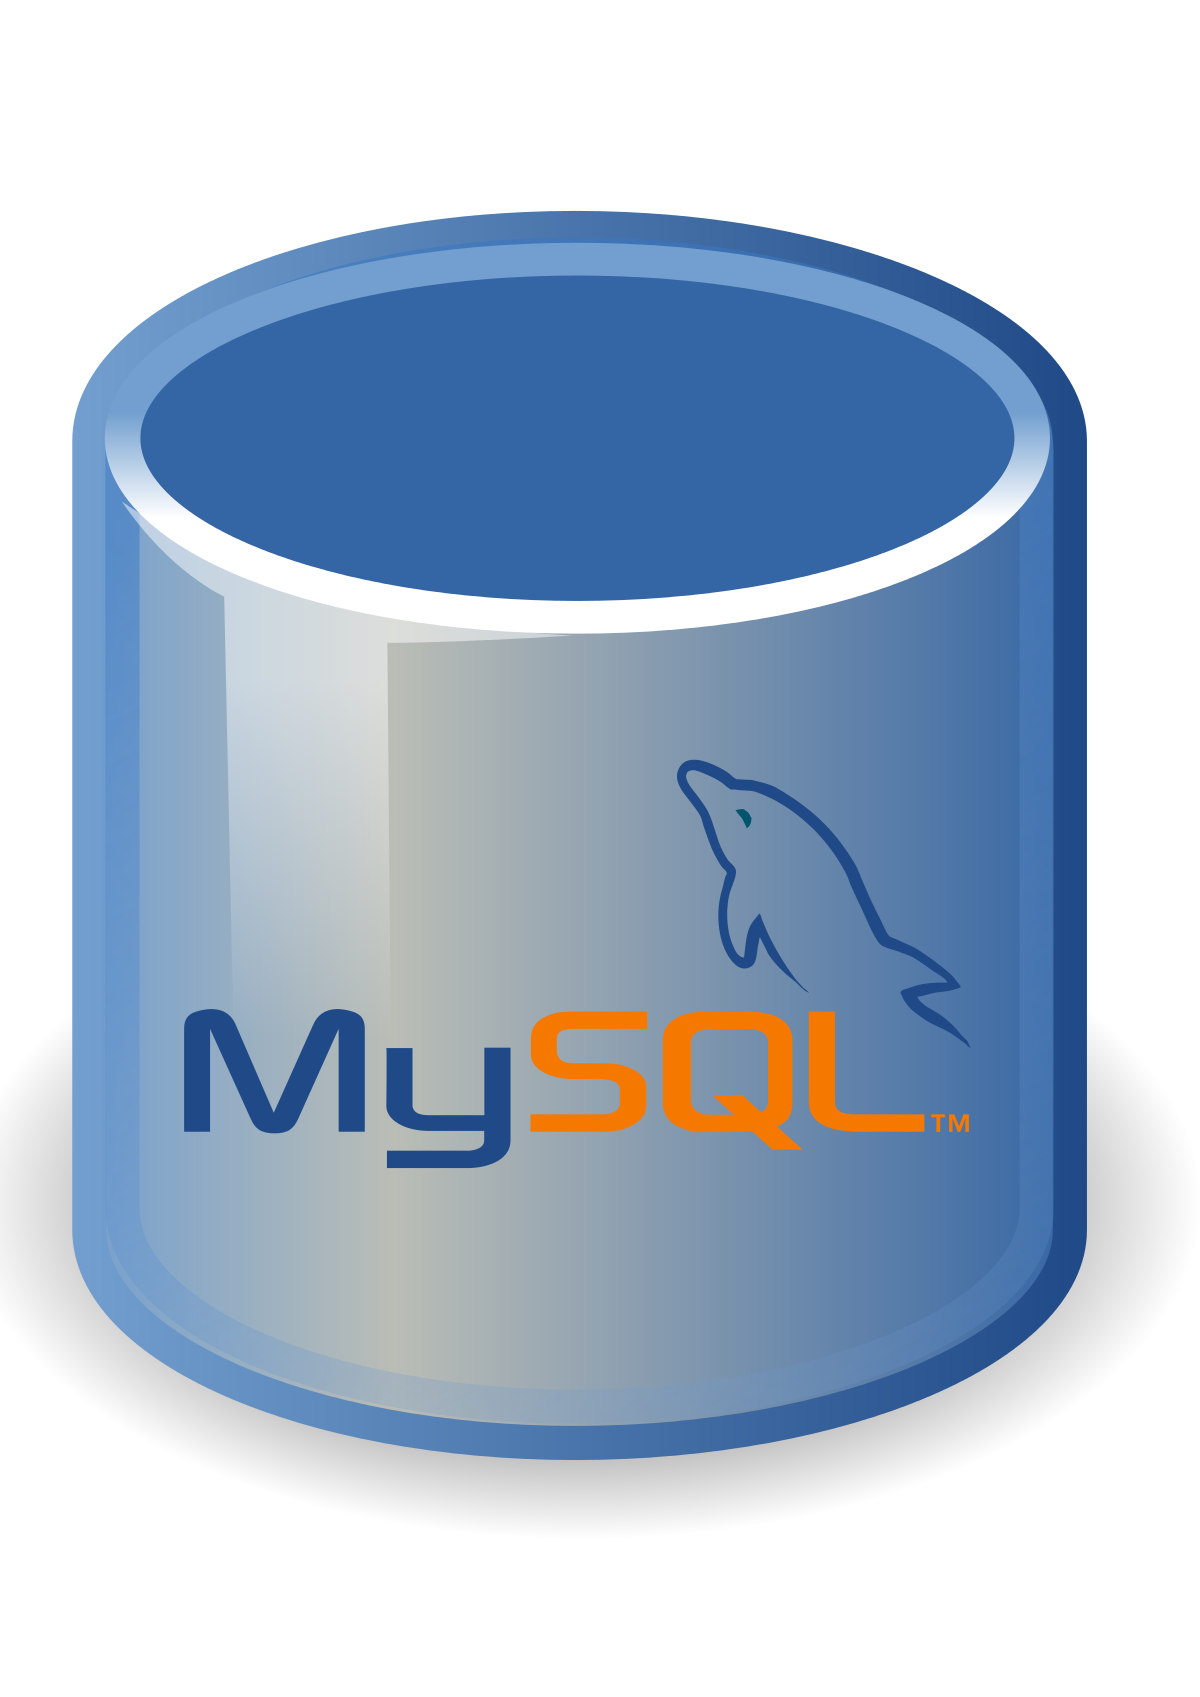 MySQL (more than 6 years experience)